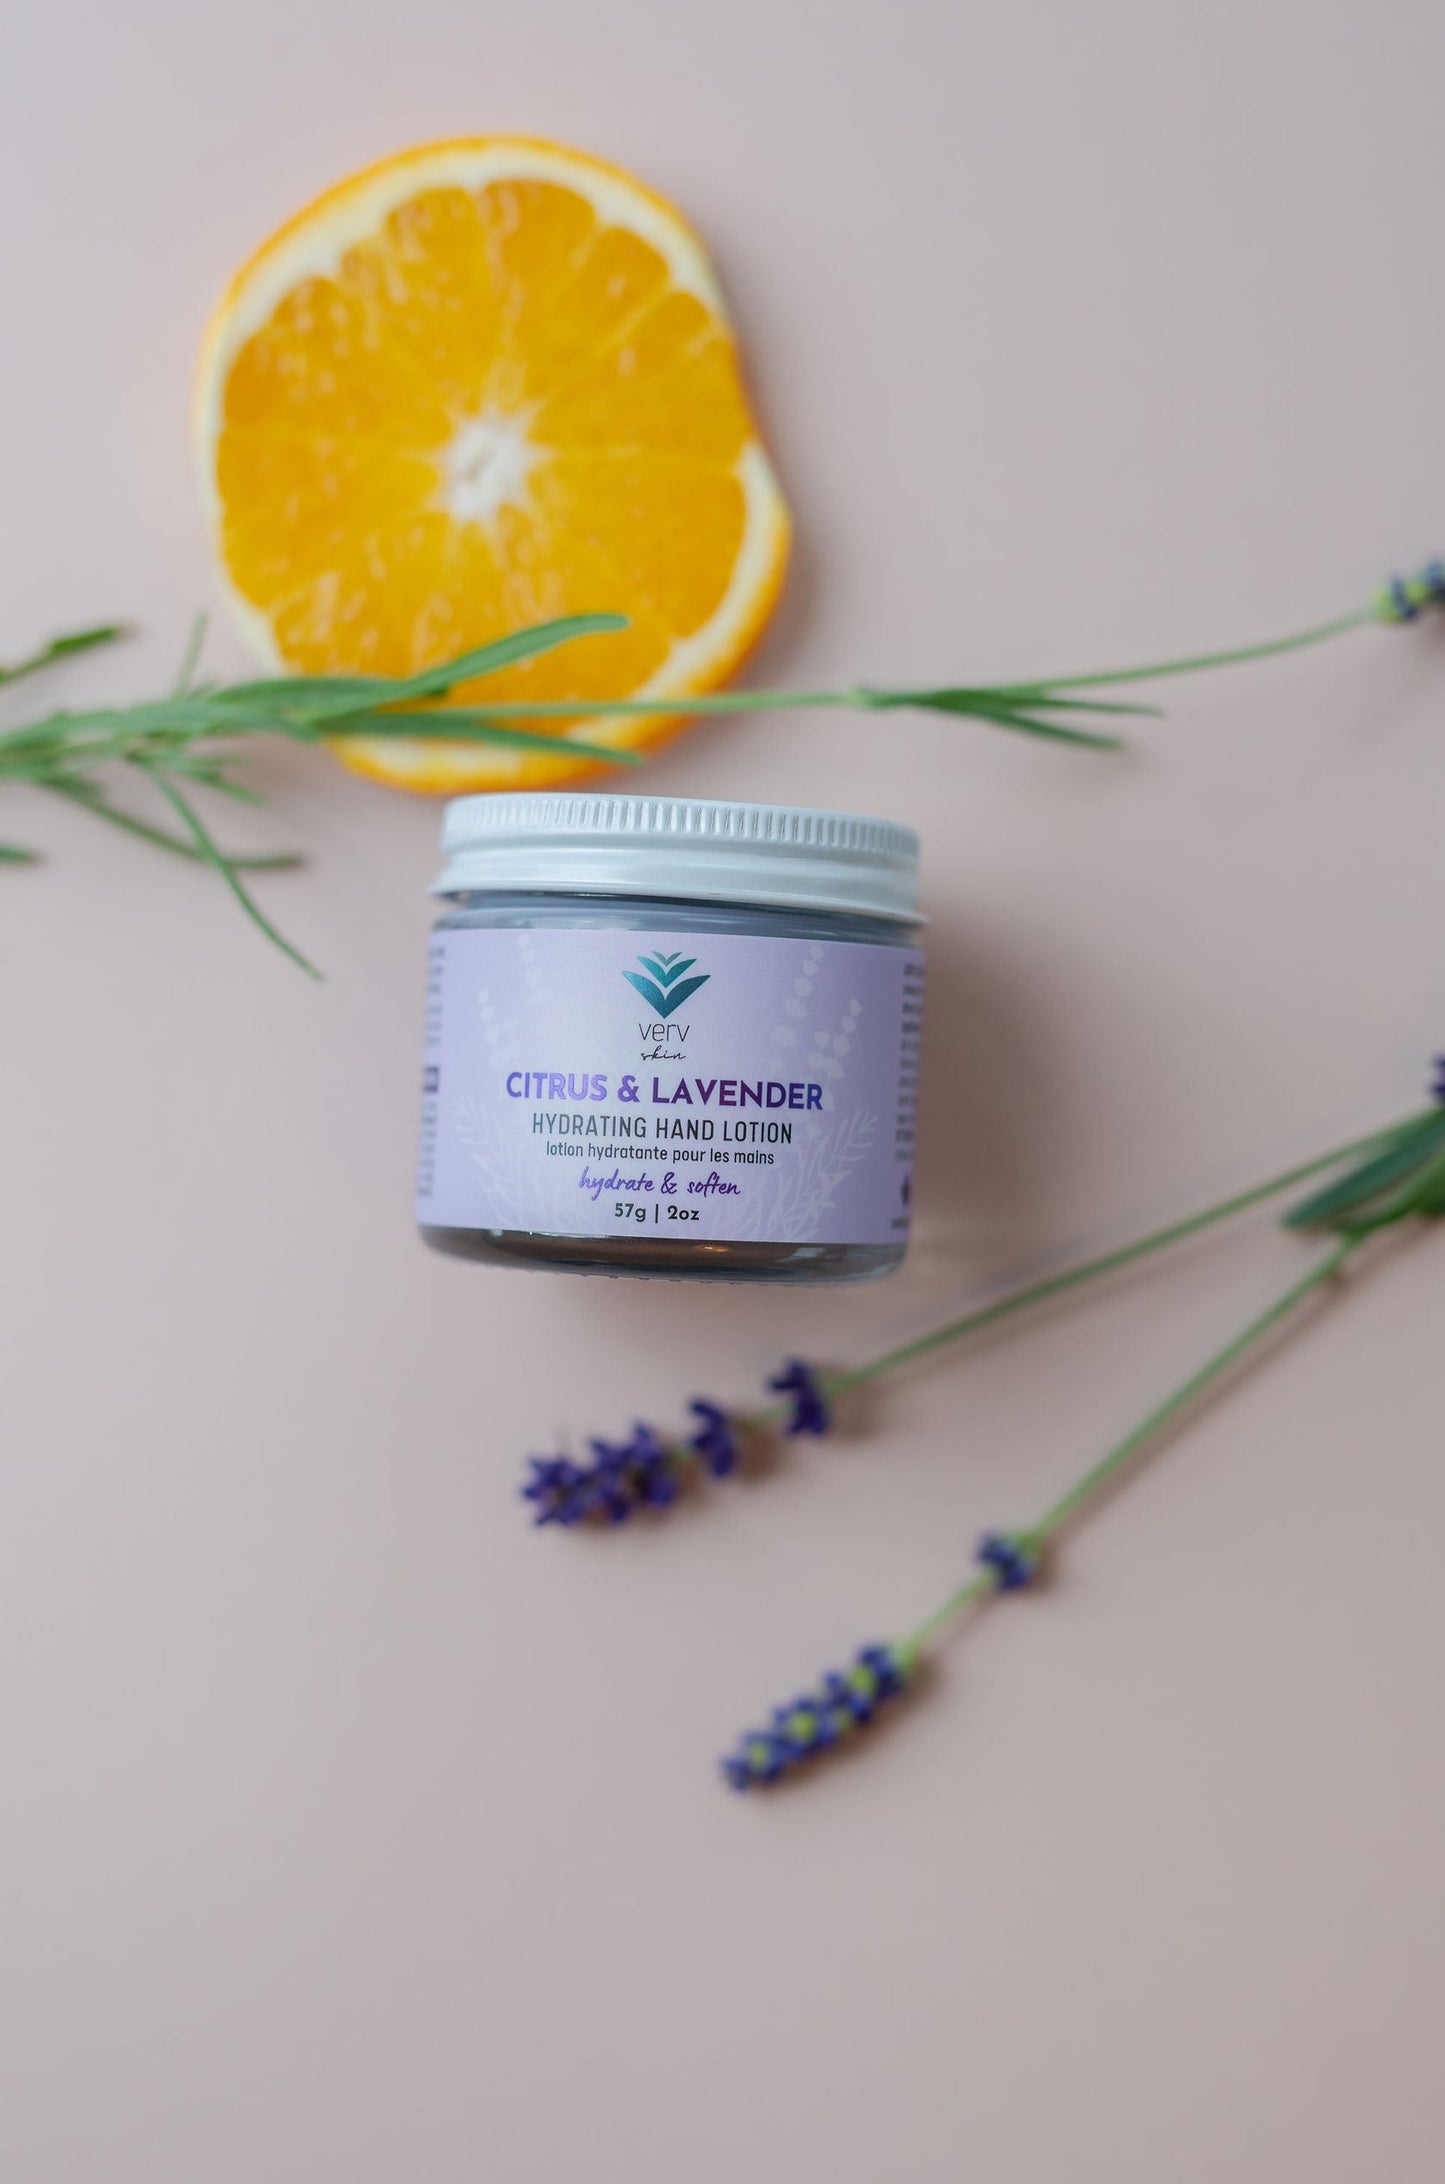 Citrus & Lavender Hydrating Hand Lotion